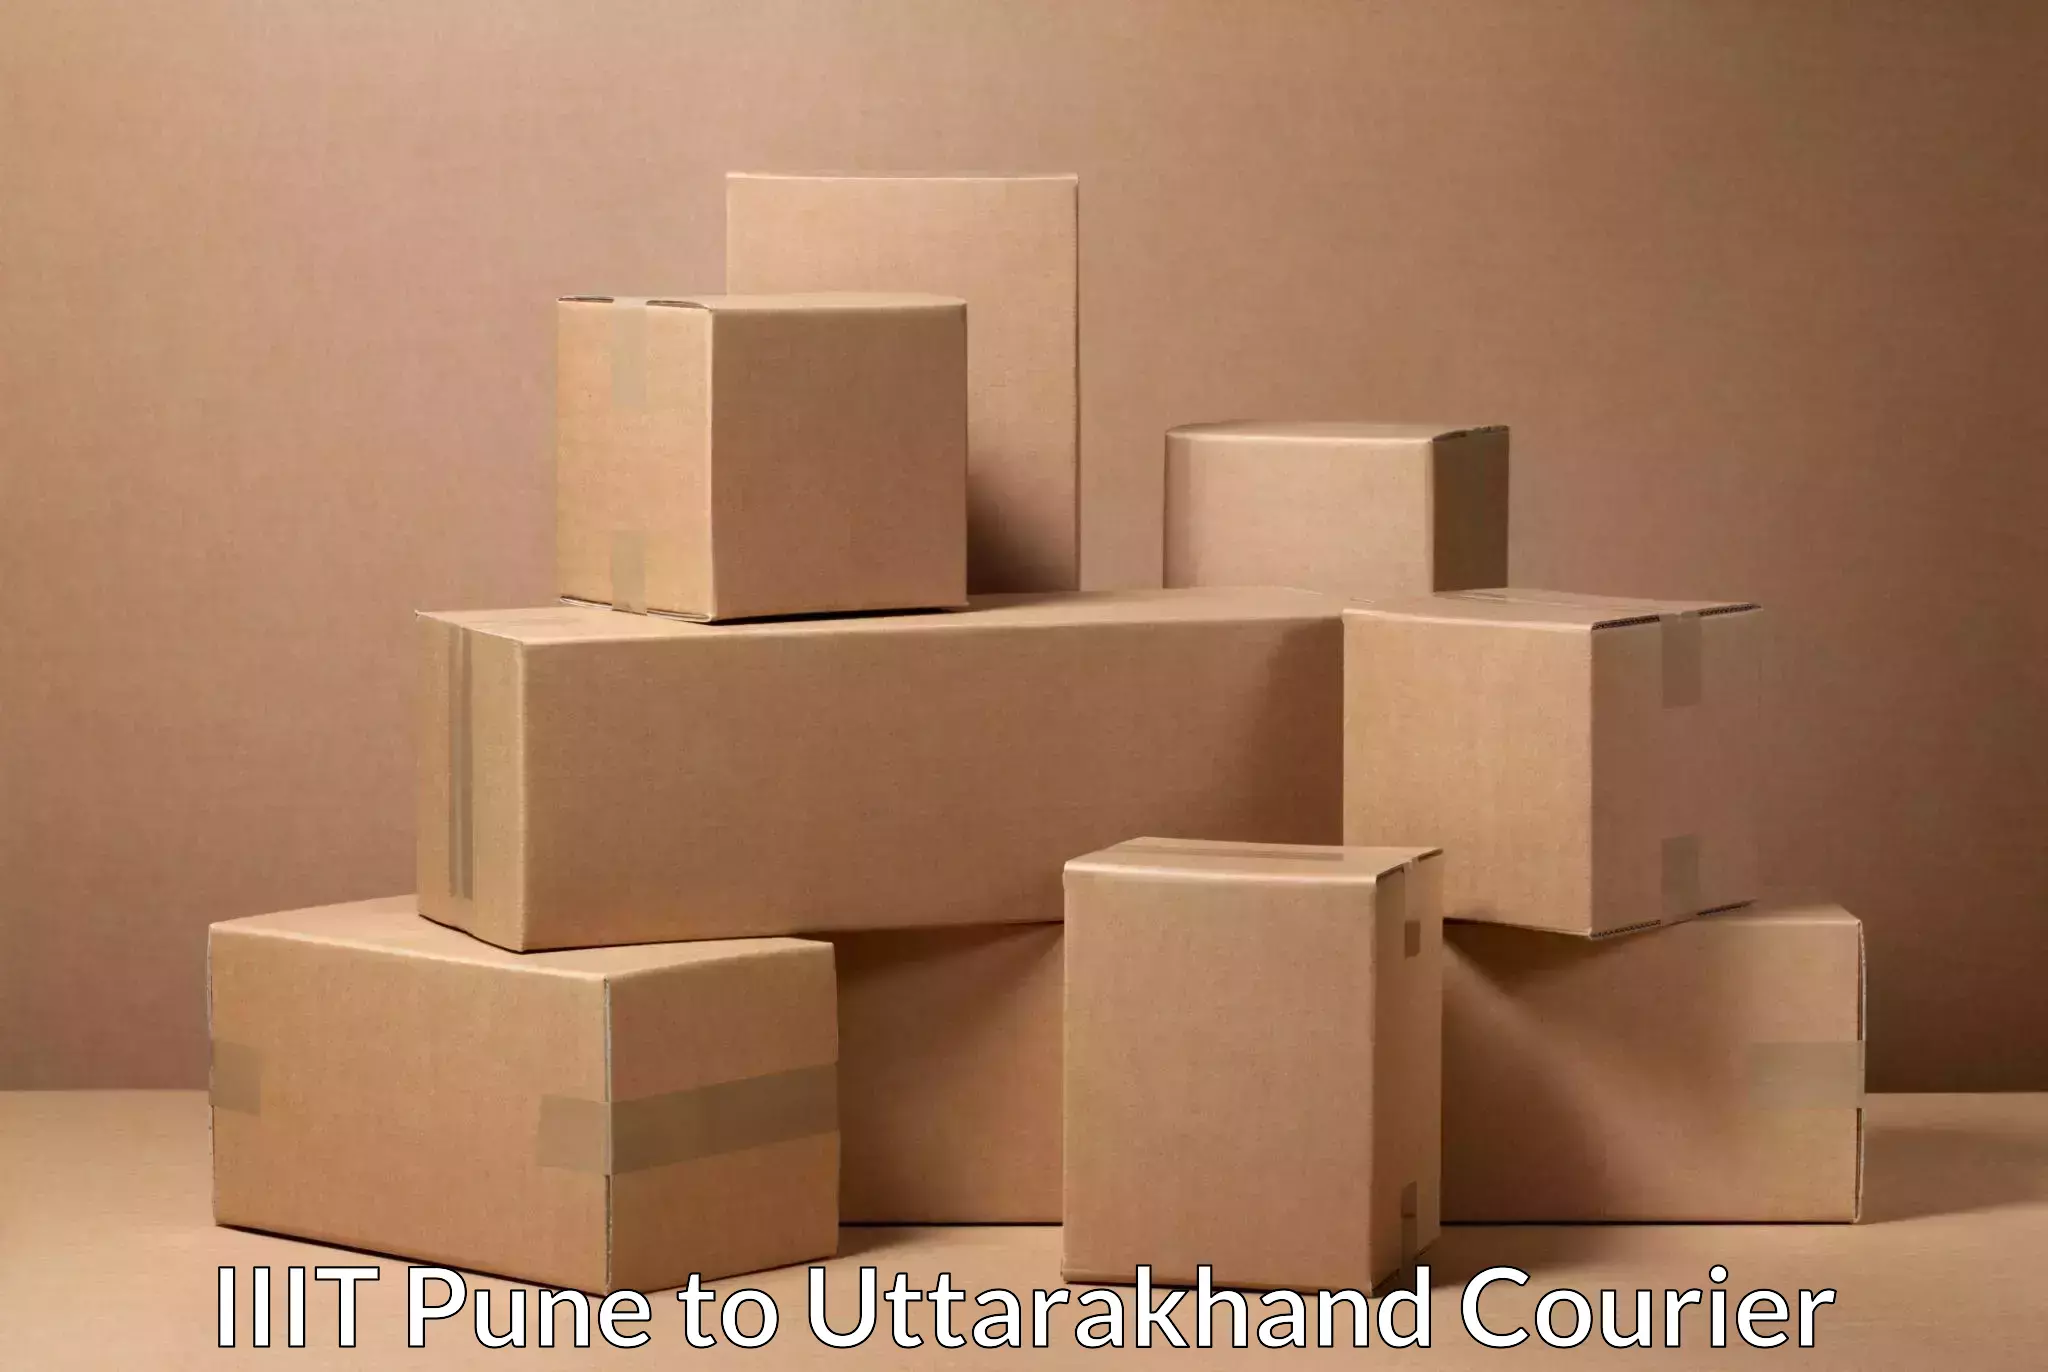 Affordable parcel rates IIIT Pune to Rudraprayag